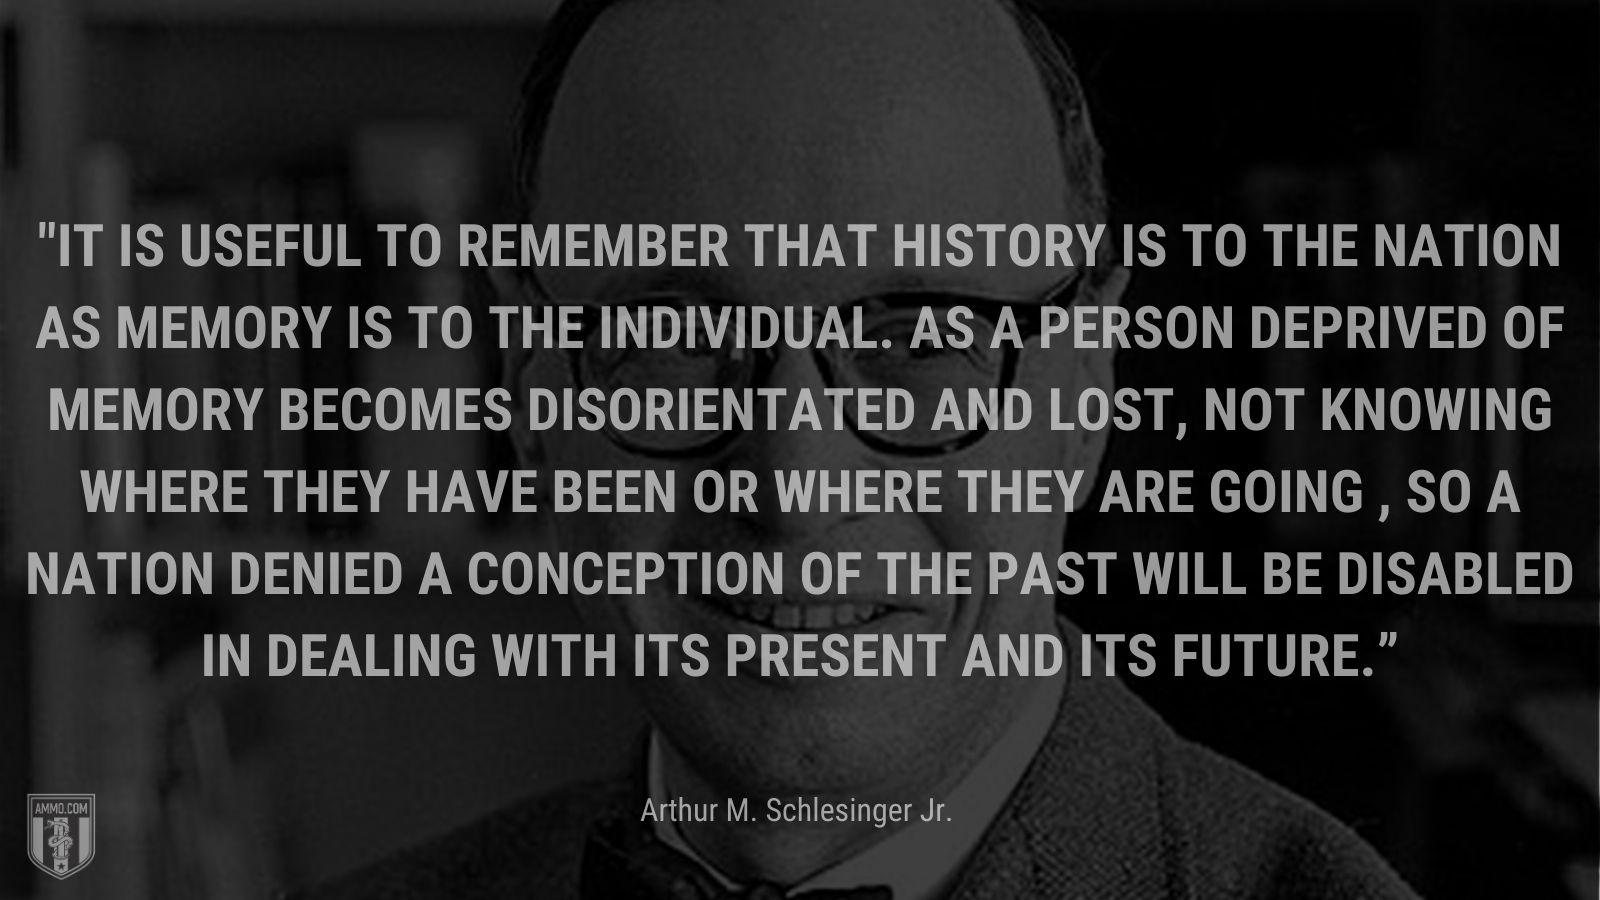 “It is useful to remember that history is to the nation as memory is to the individual. As a person deprived of memory becomes disorientated and lost, not knowing where they have been or where they are going , so a nation denied a conception of the past will be disabled in dealing with its present and its future.” - Arthur M. Schlesinger Jr.